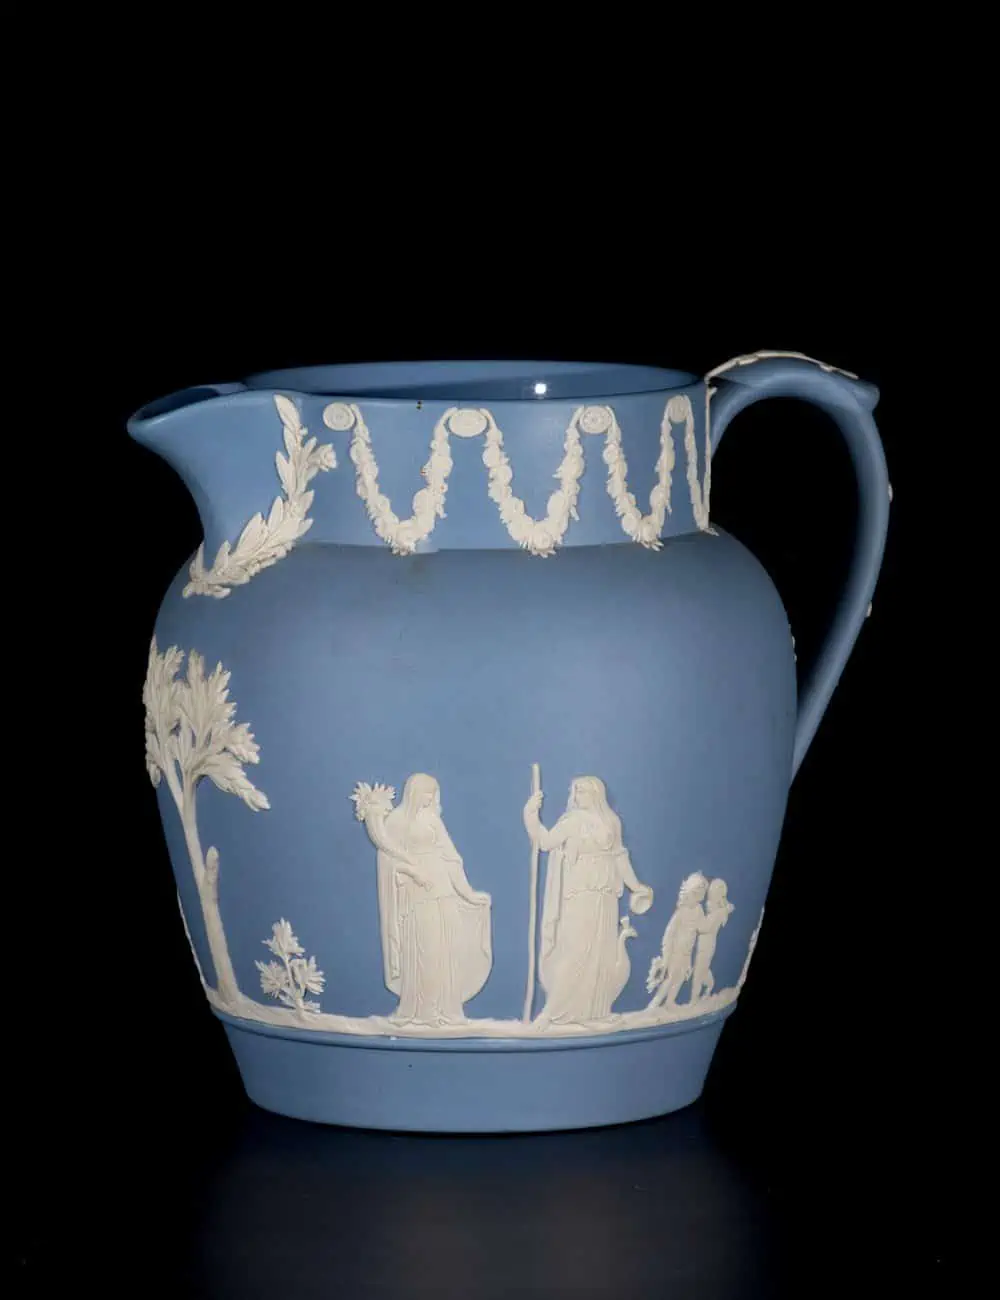 A Jasperware pitcher in the iconic Wedgwood blue. 